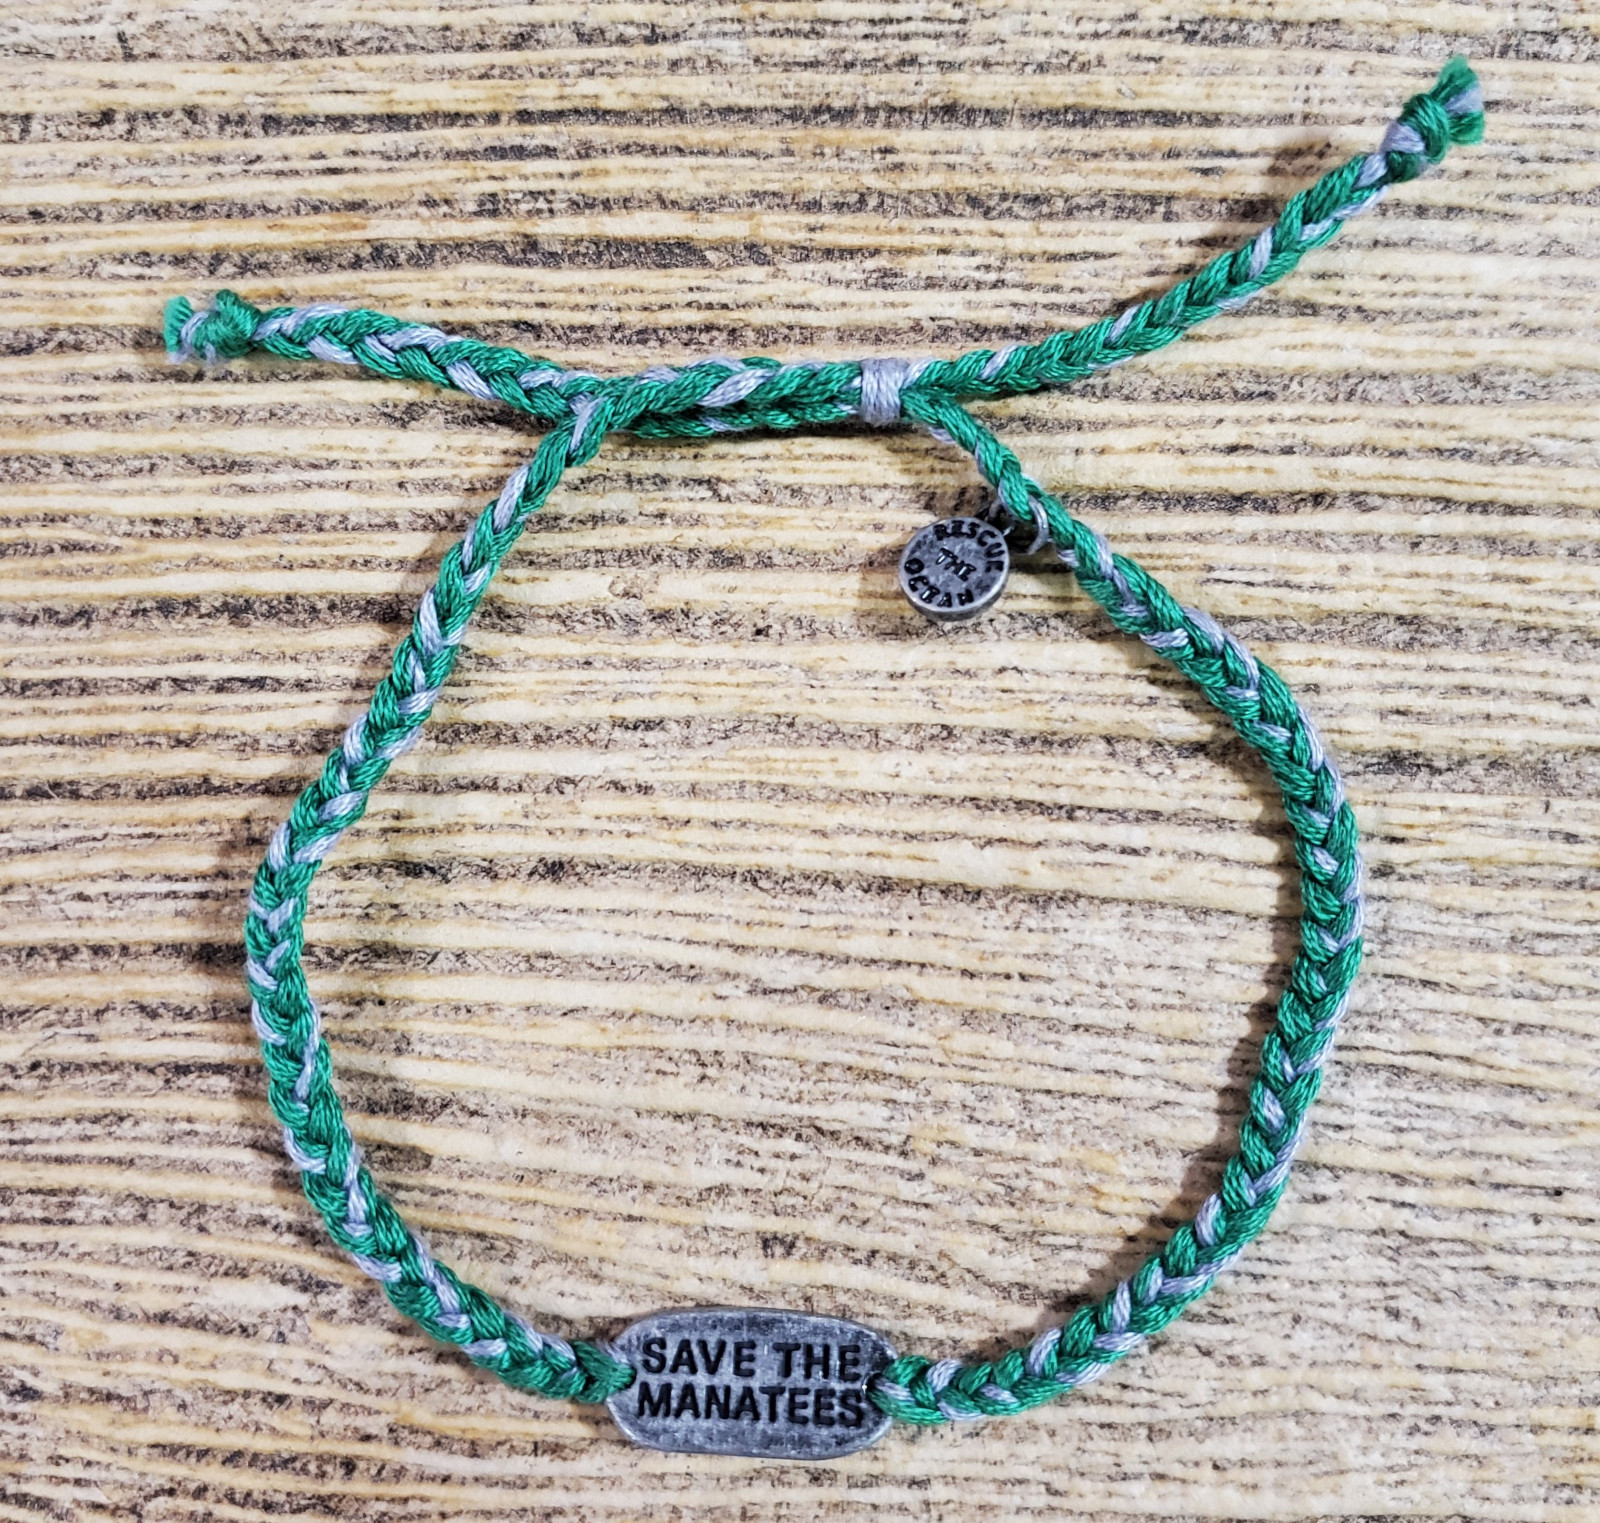 Save the Manatees Bracelet - Store - Marine Life Rescue Project™